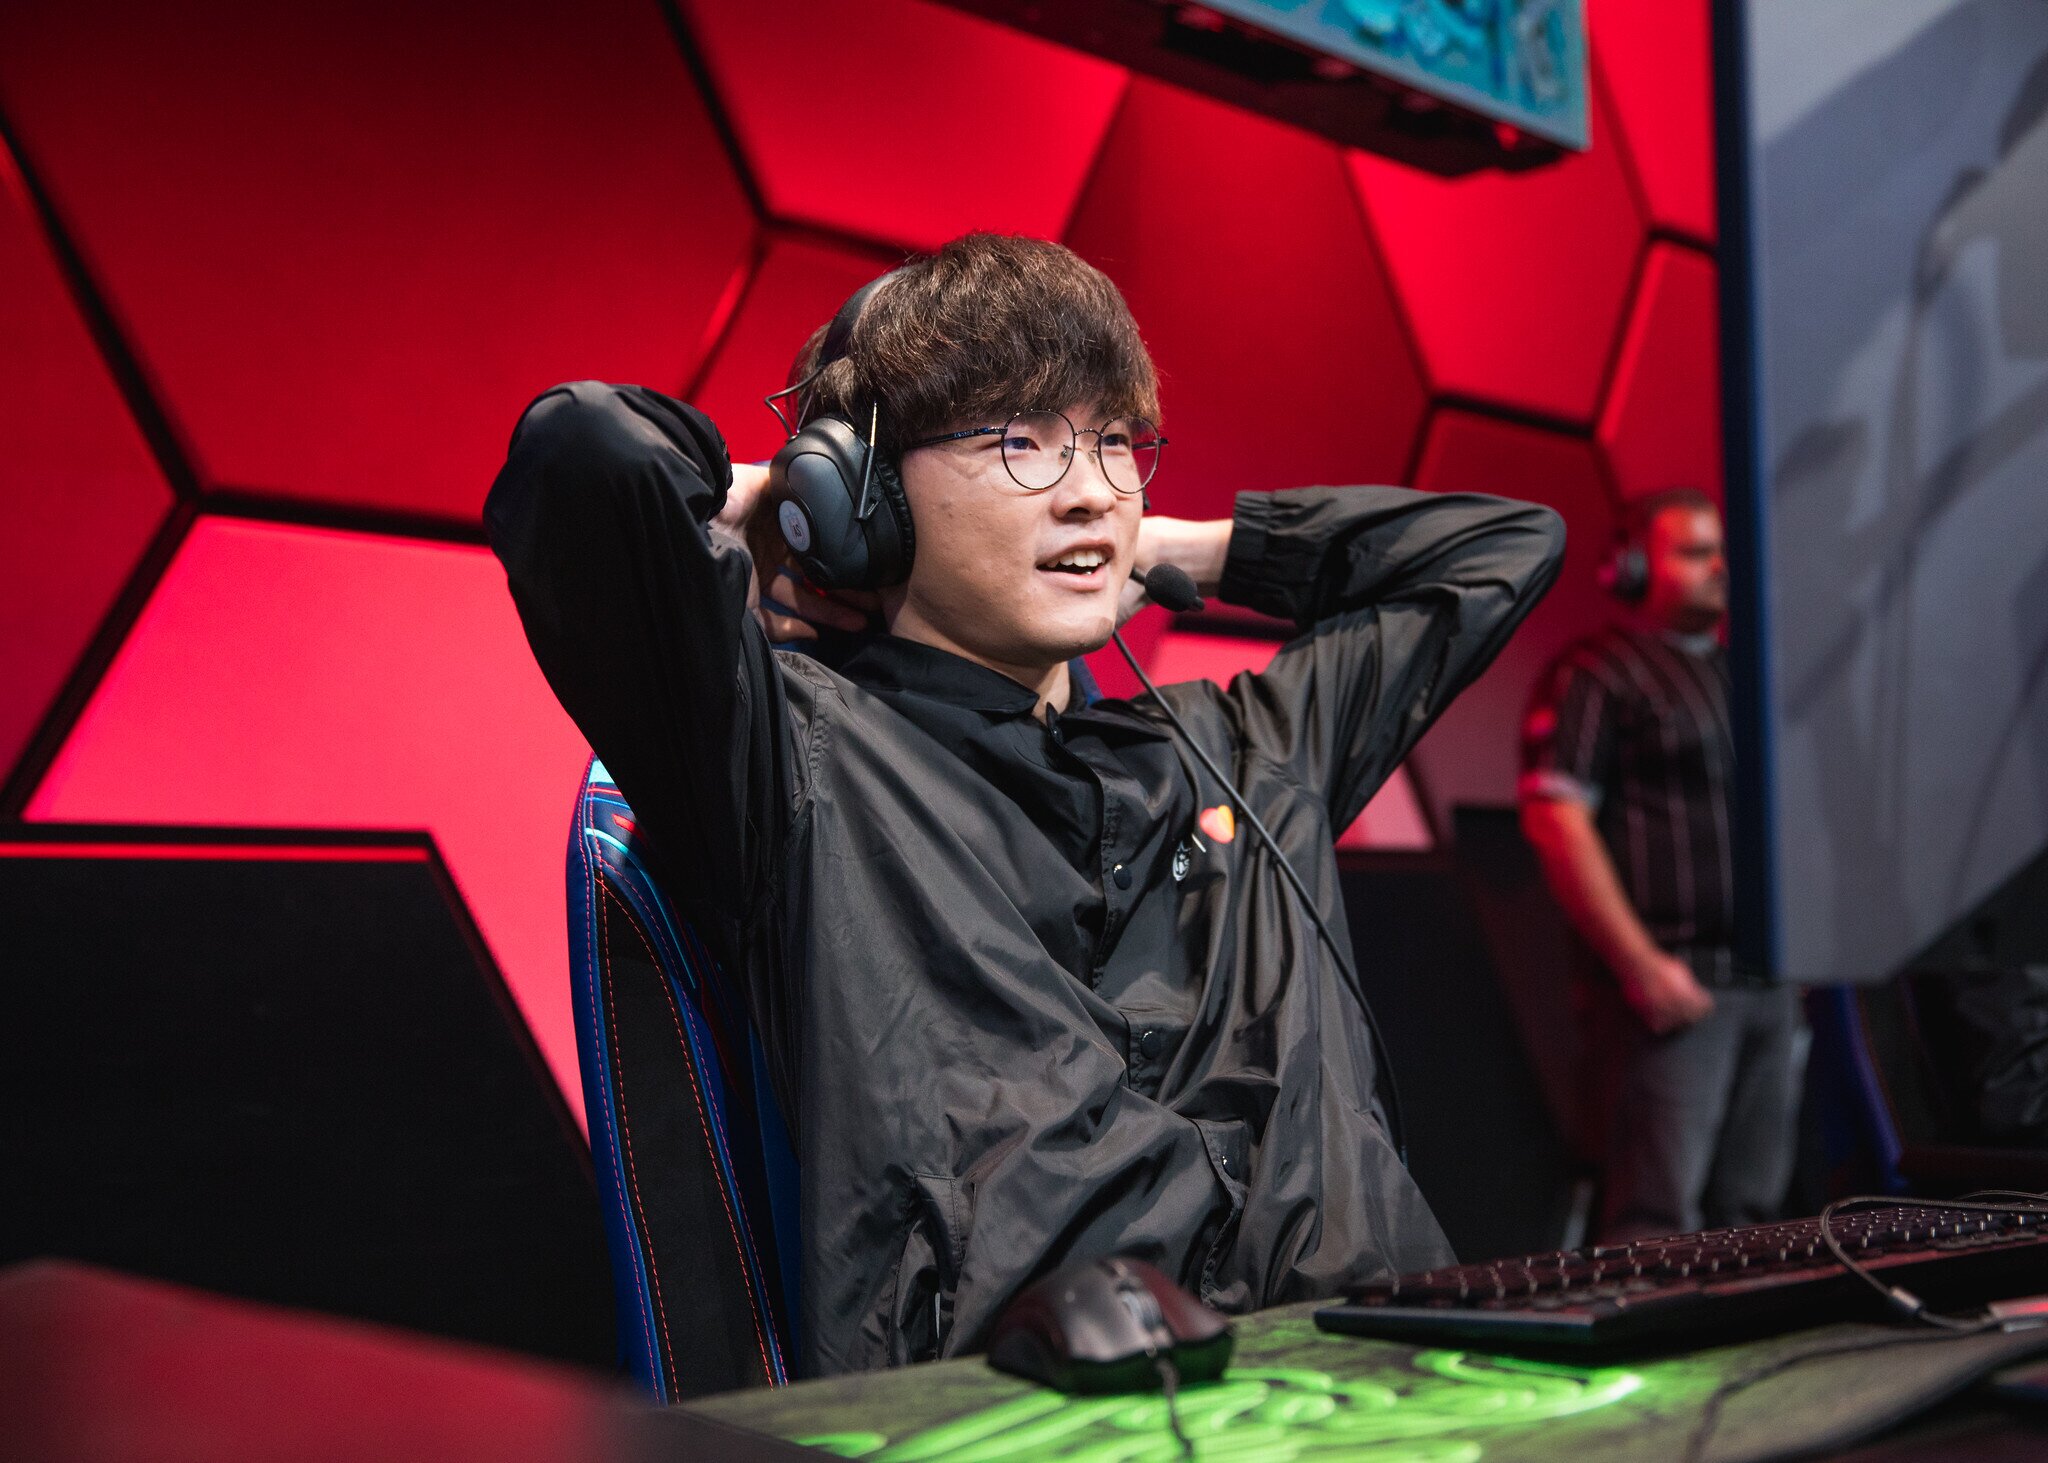 The new Mid-Season Cup features the best from the LCK and LPL )Photo via Colin Young-Wolff